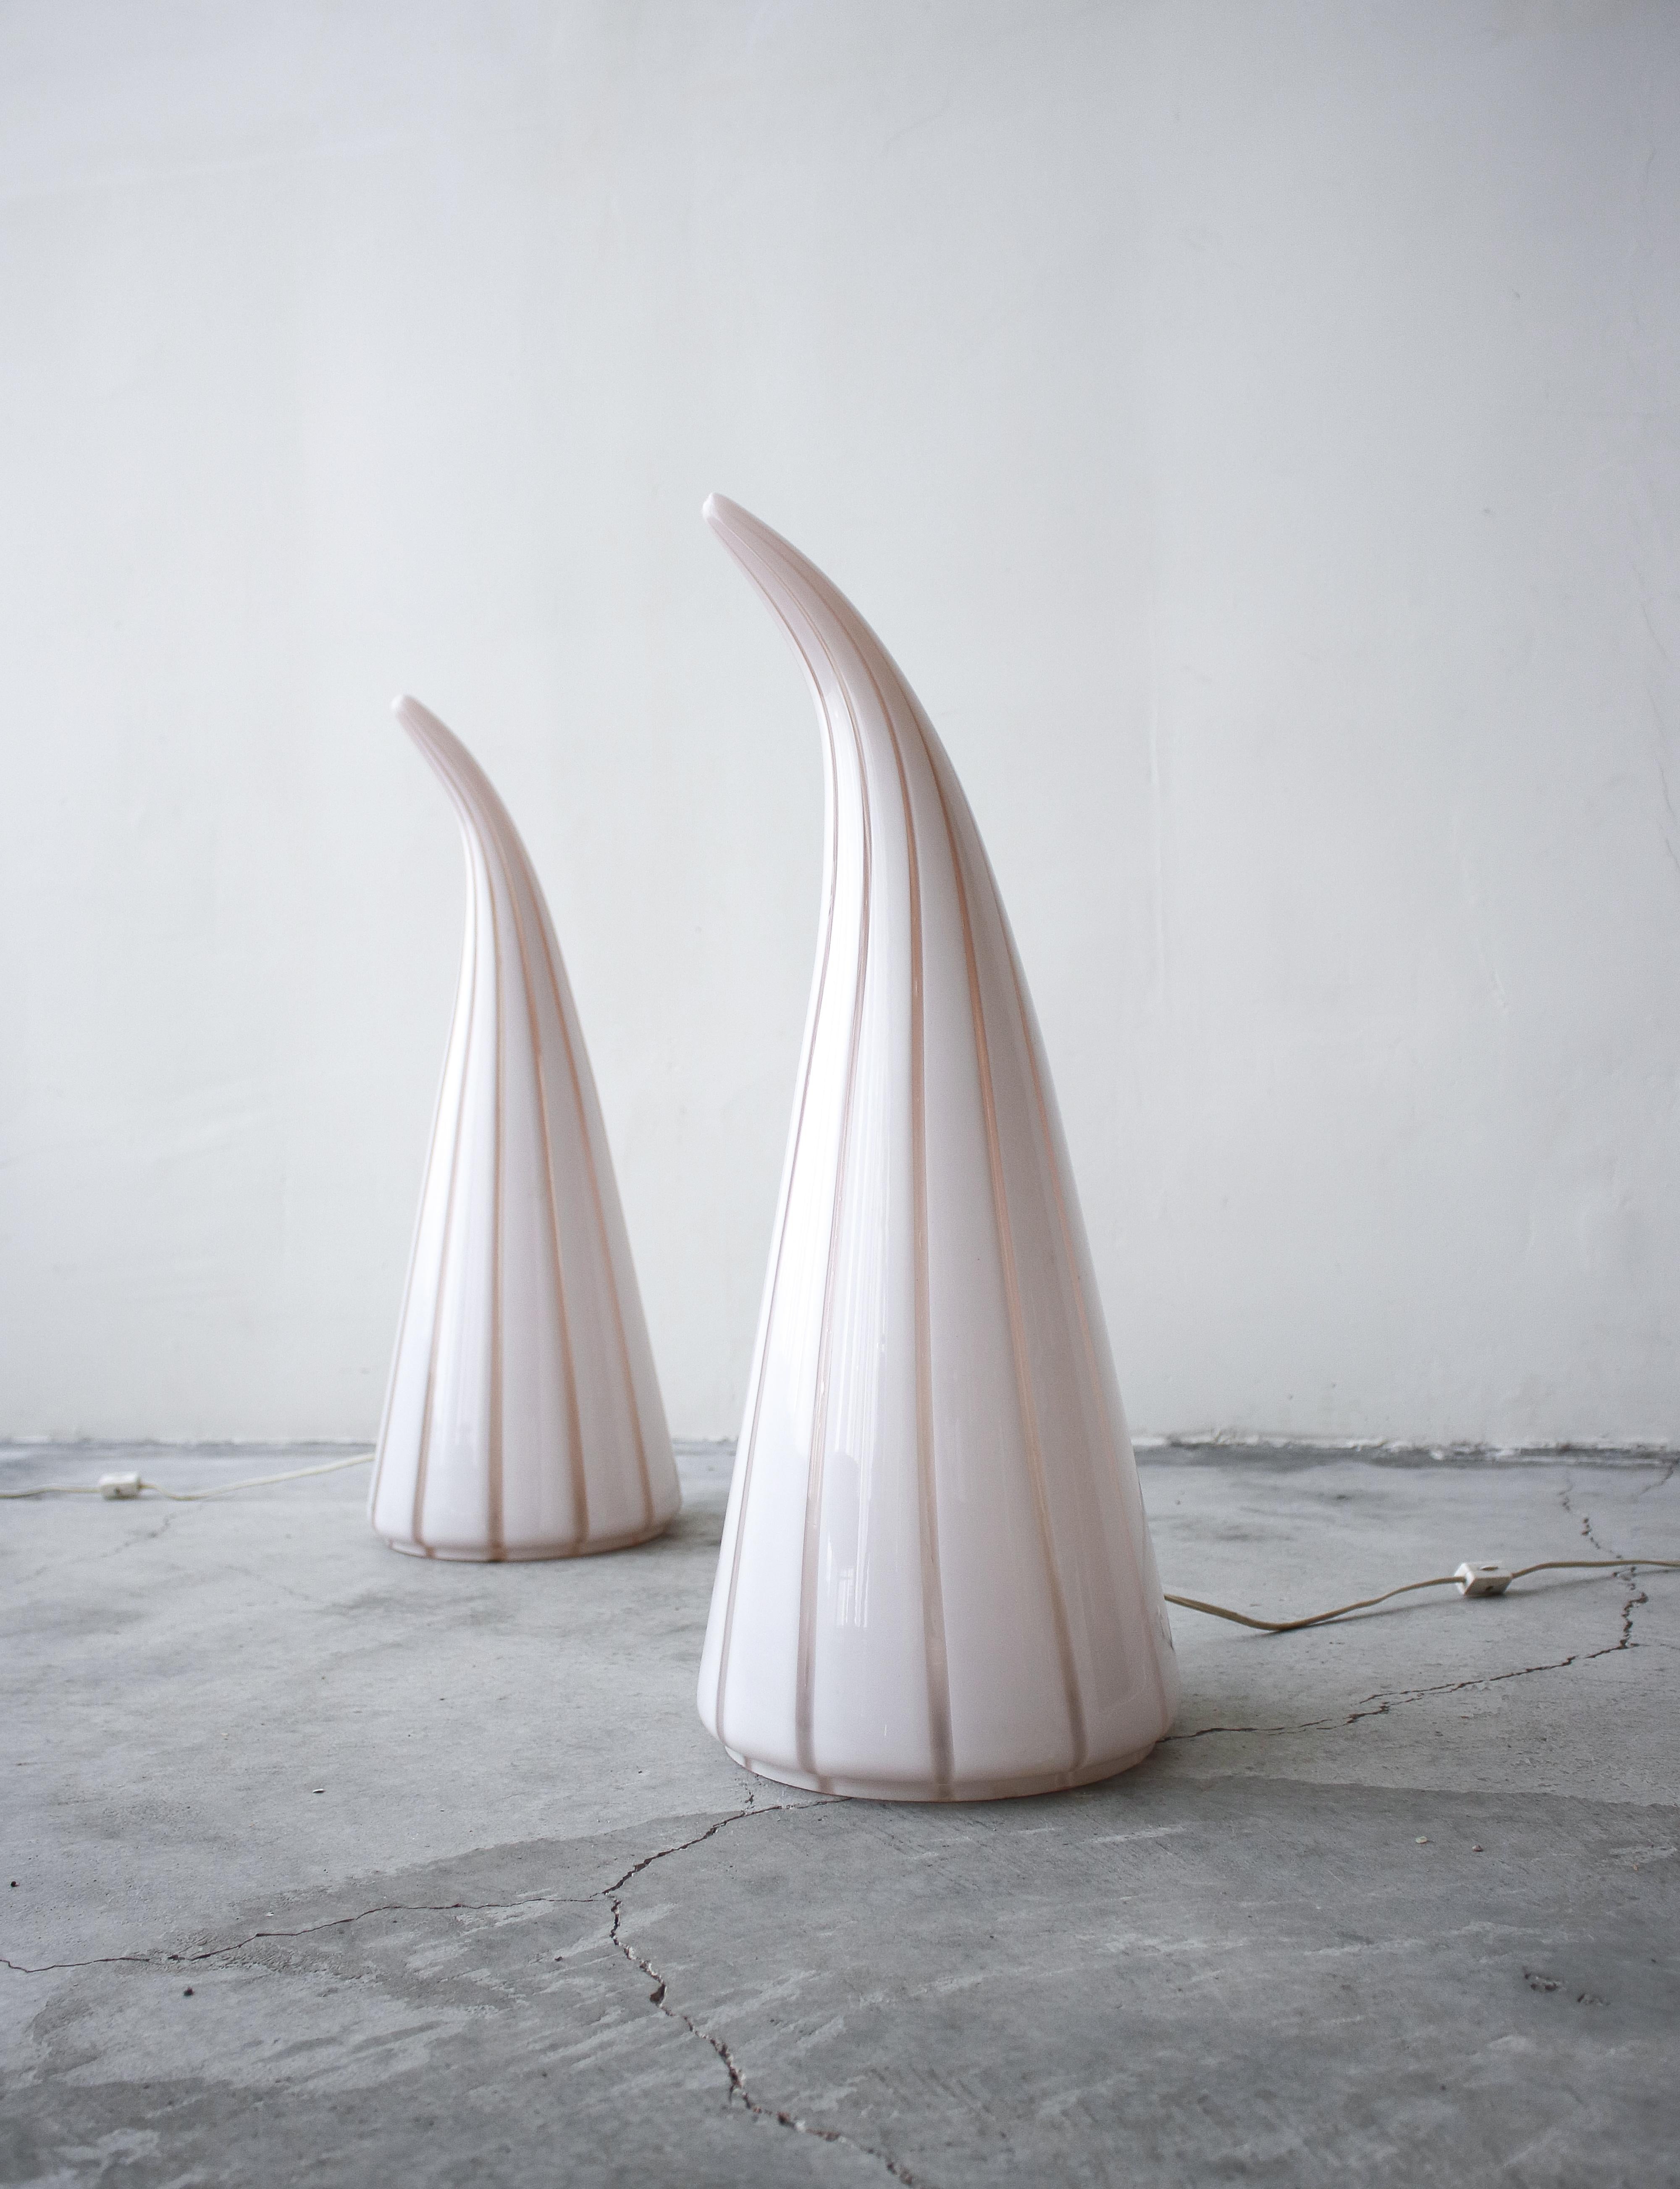 Stunning pair of blown glass Horn table lamps by Seguso Vetri d'Arte. Lamps are a sophisticated Horn shape with milky white and a transparent pale pink swirl. They give off the warmest glow when on, the perfect mood light.

Lamps are in excellent